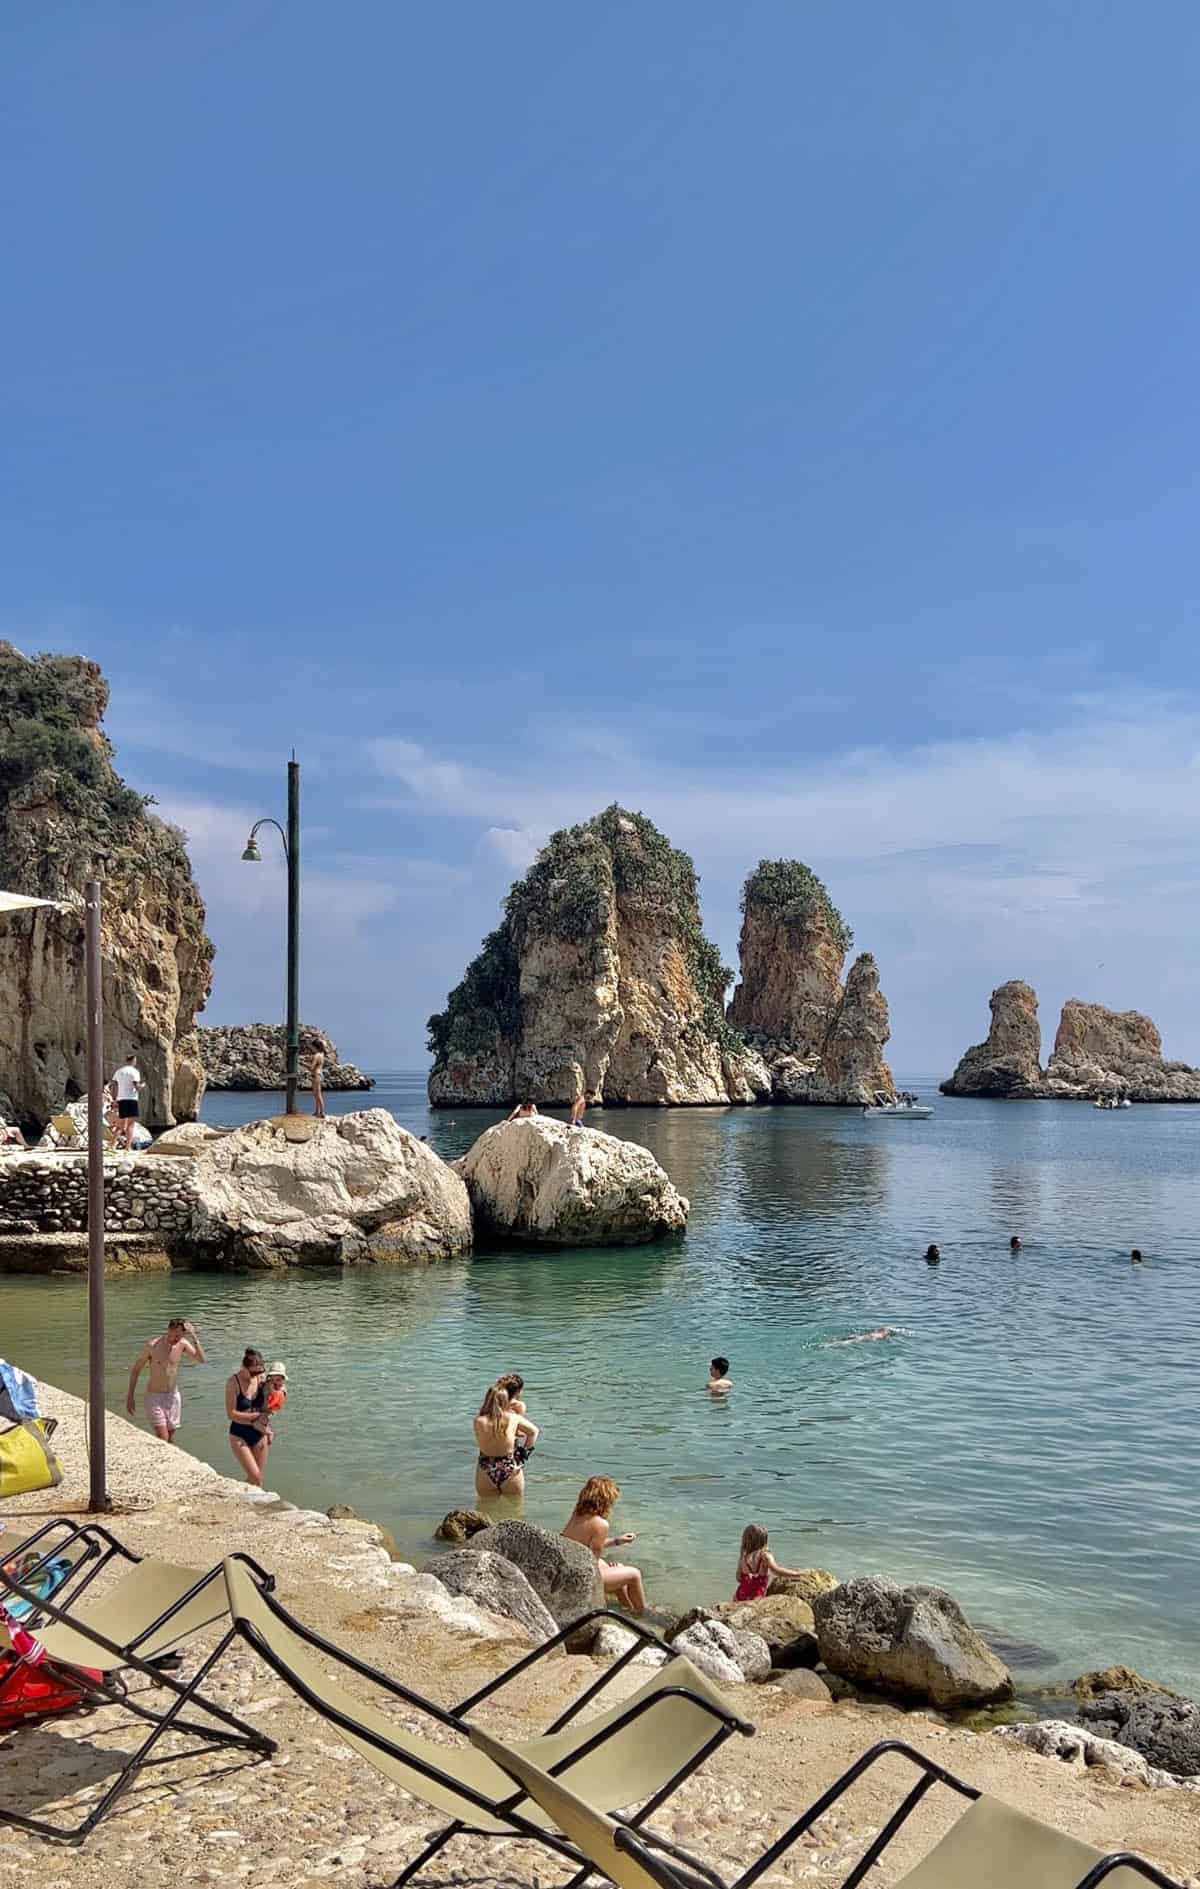 An image of the aquamarine waters, jagged rocks, sunbeds and bathers of Tonnara di Scopello on a bright summer day